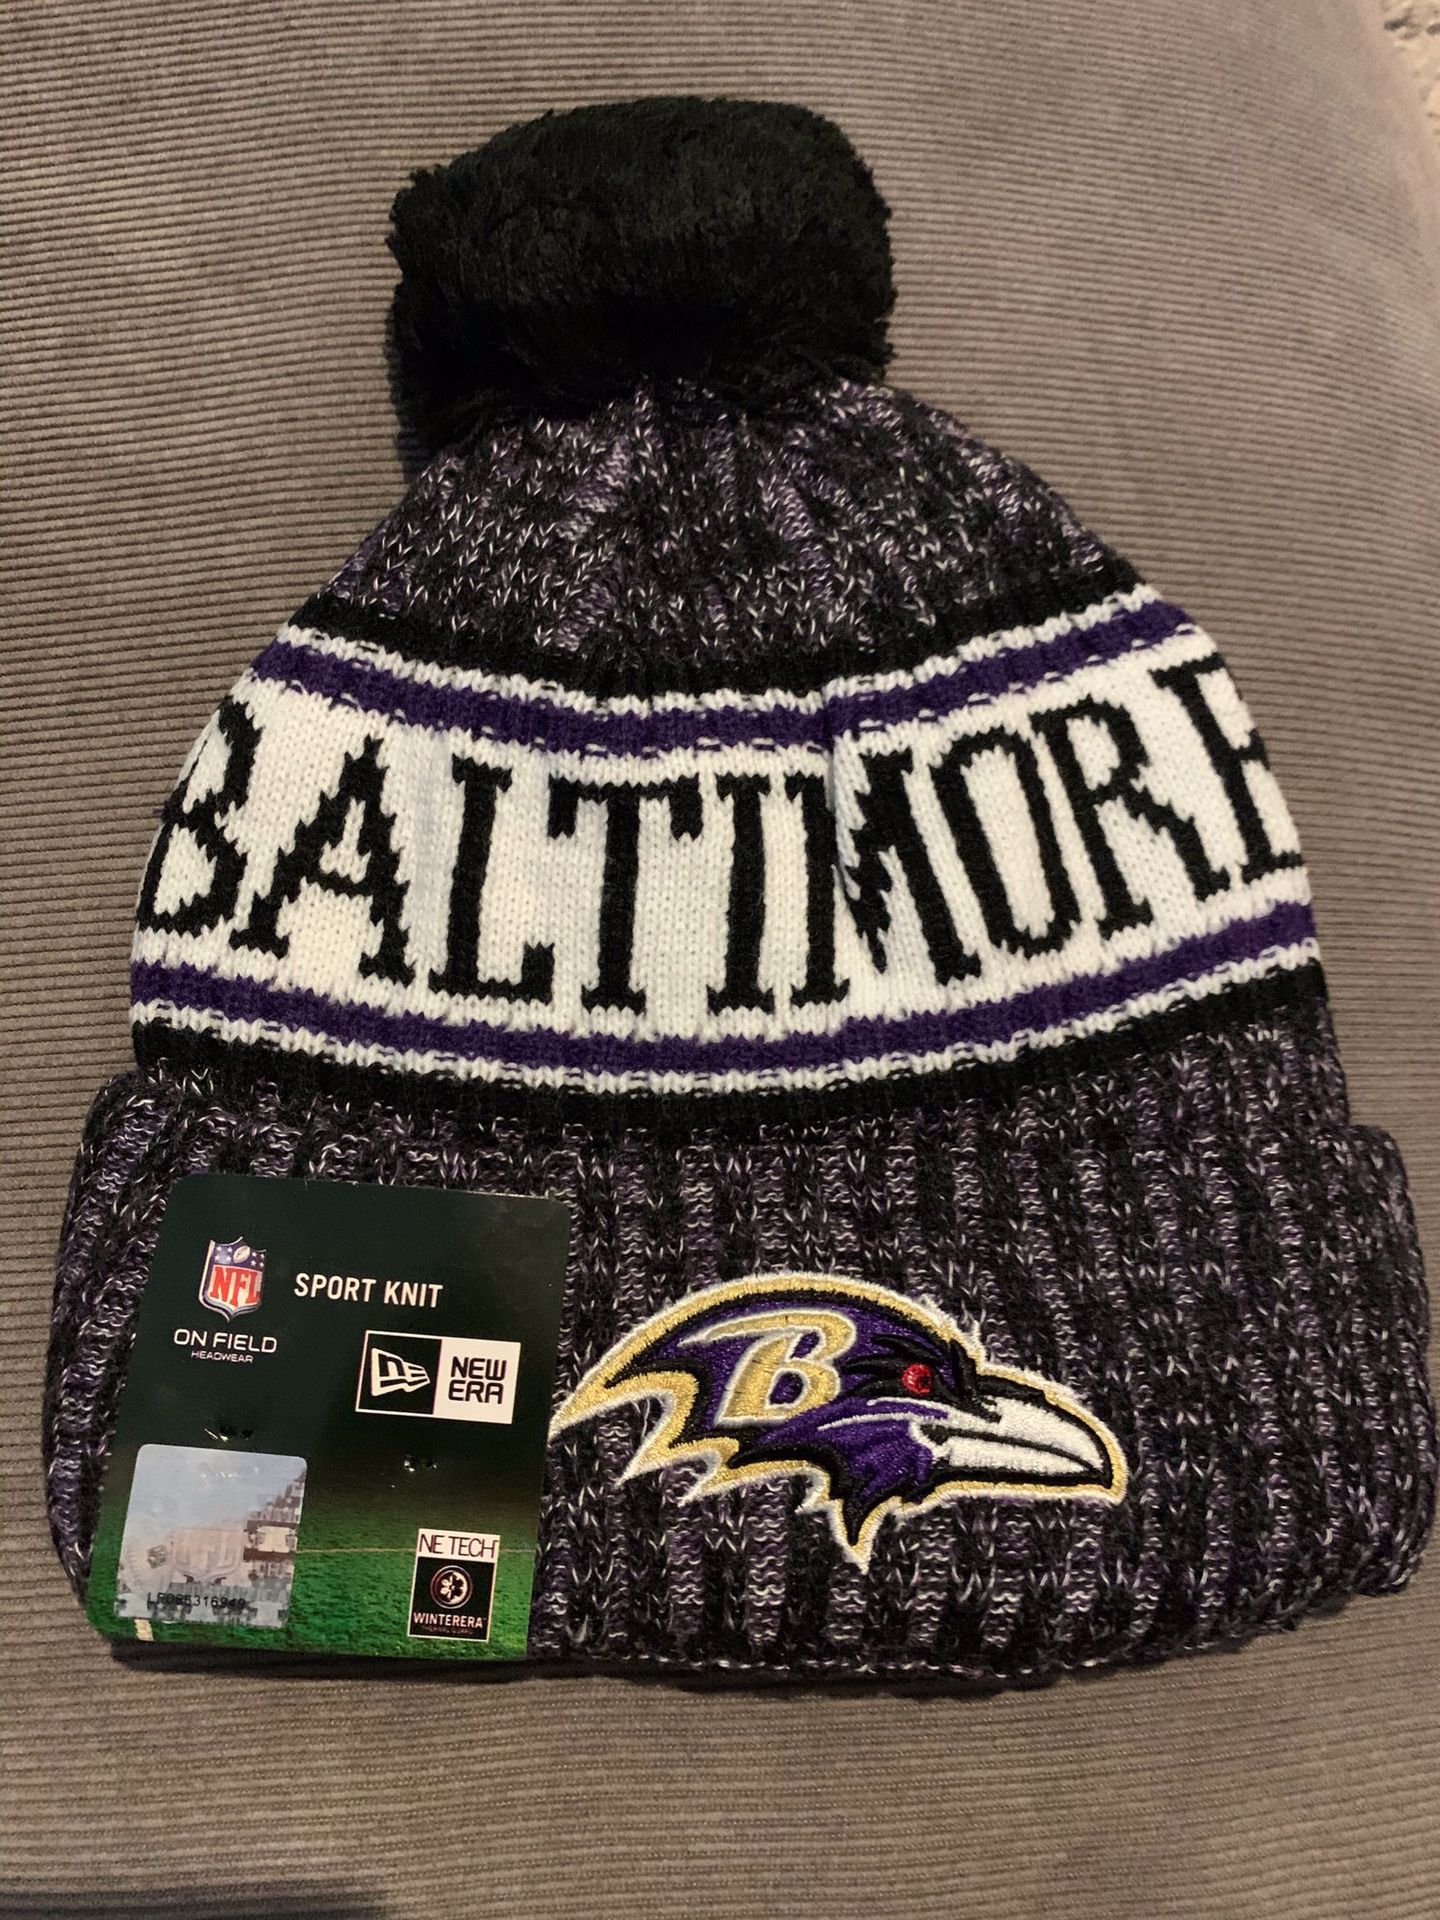 BALTIMORE RAVENS NFL NEW ERA BEANIE HAT BRAND NEW WITH TAGS